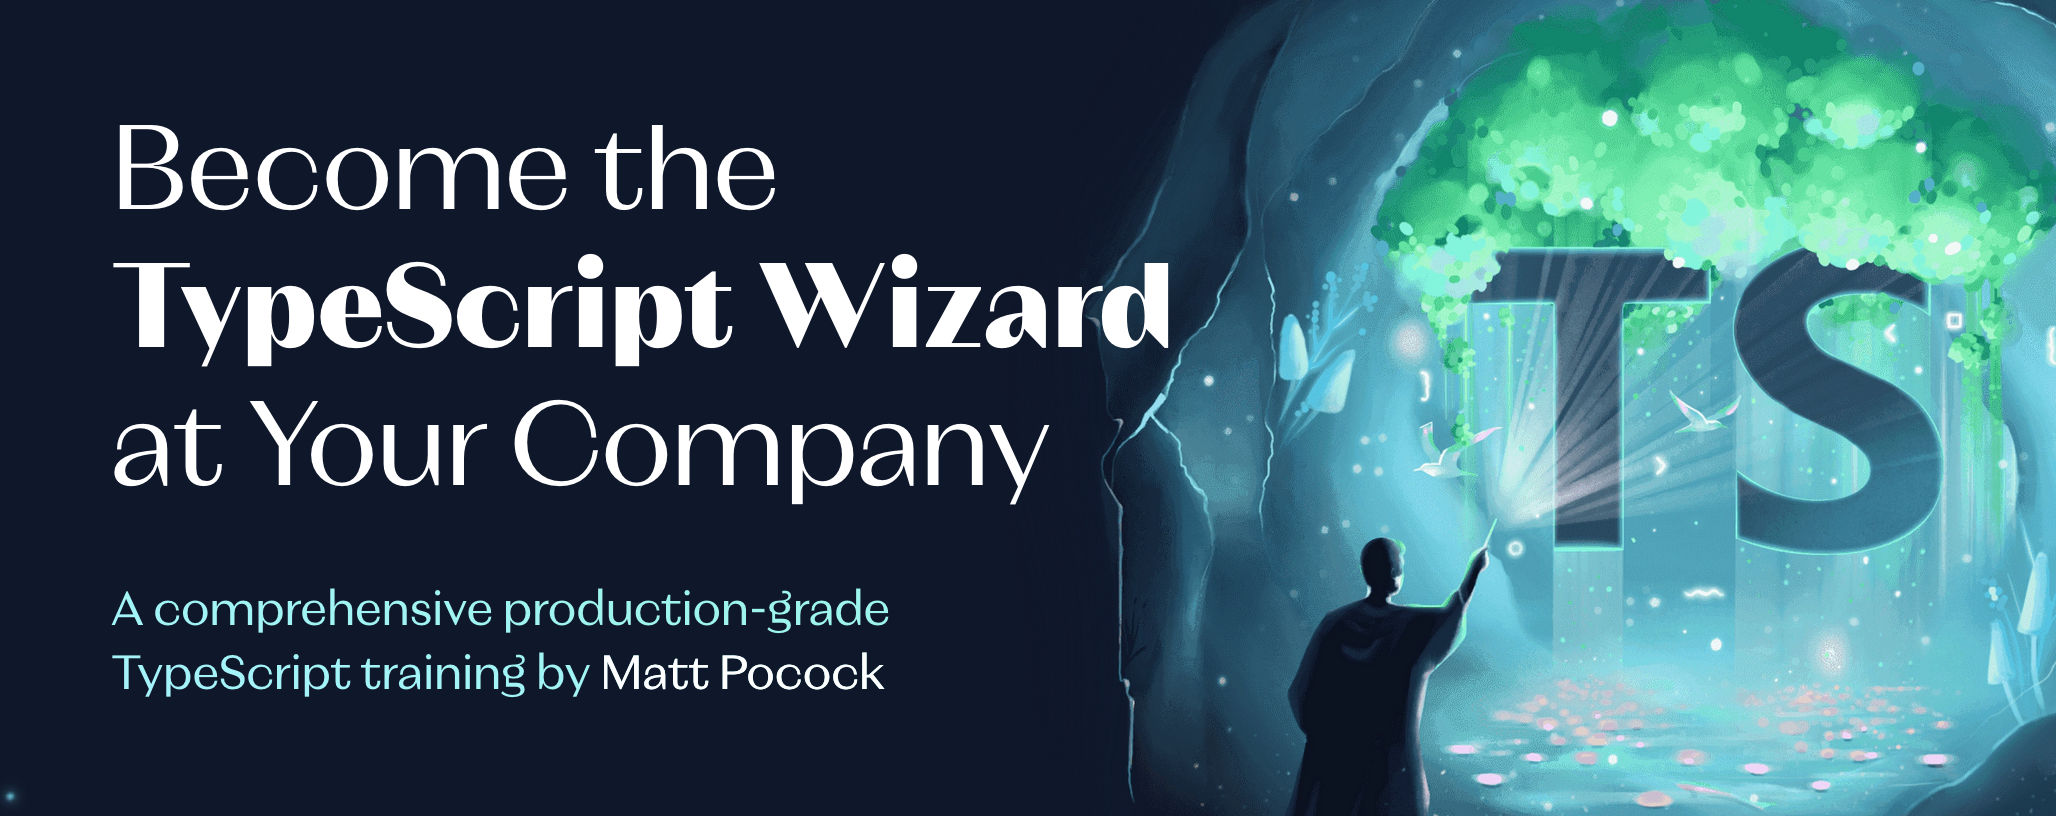 Become the TypeScript Wizard at Your Company — A comprehensive production-grade TypeScript training by Matt Pocock